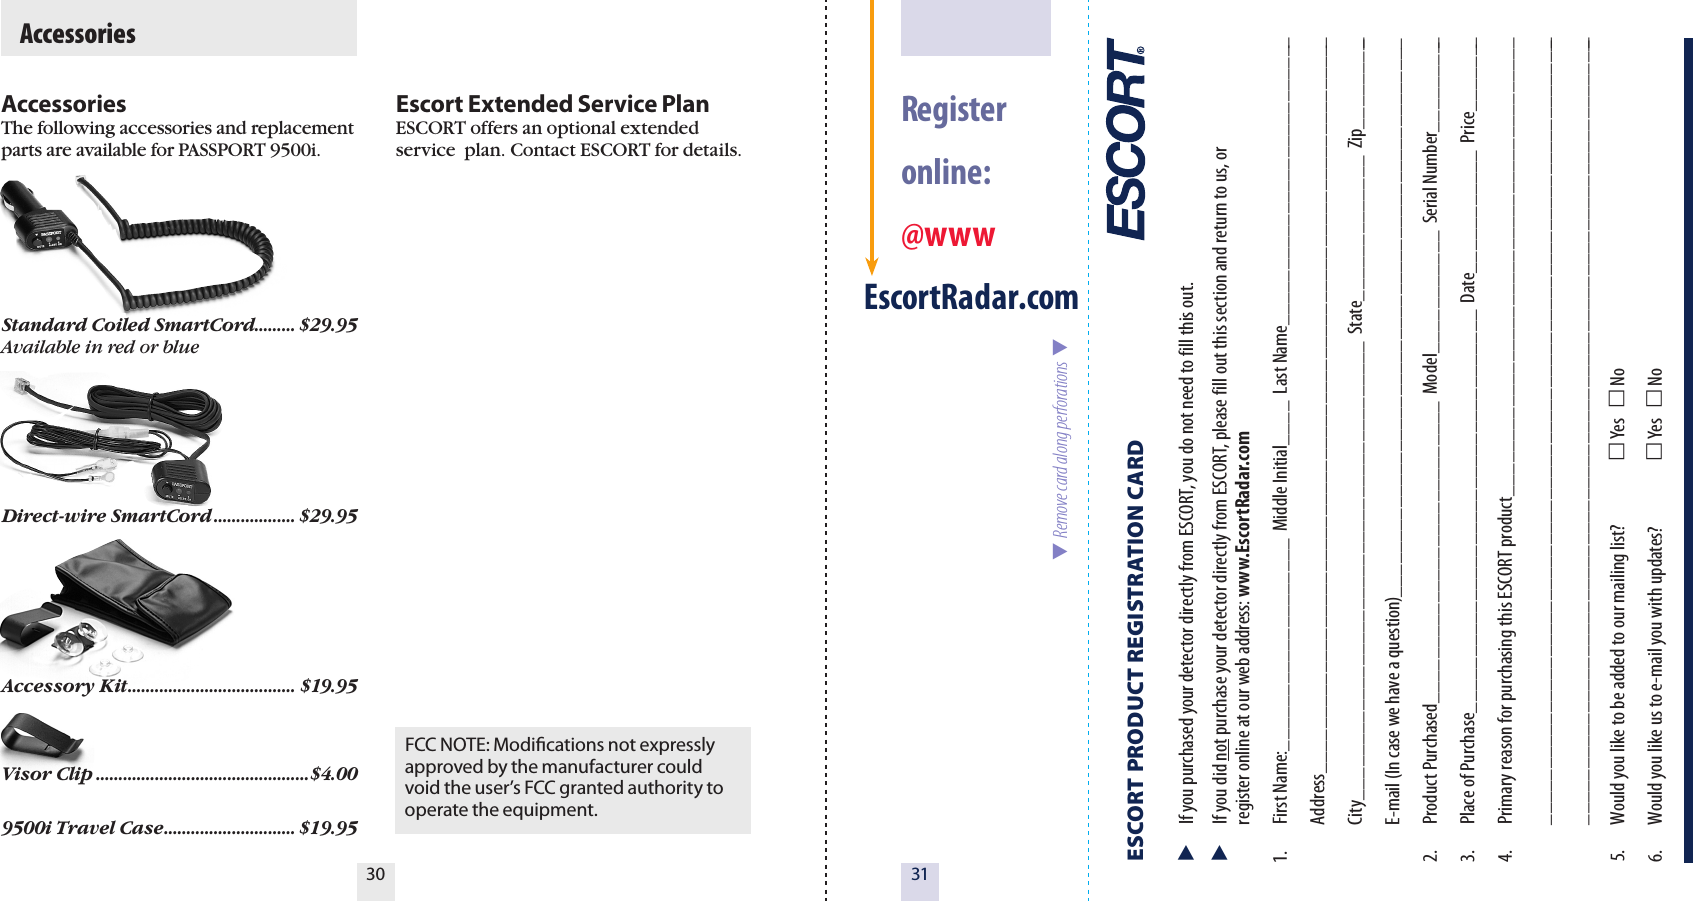 3130  Register  online: @wwwEscortRadar.comESCORT PRODUCT REGISTRATION CARD   If you purchased your detector directly from ESCORT, you do not need to fill this out.  If you did not purchase your detector directly from ESCORT, please fill out this section and return to us, or   register online at our web address: www.EscortRadar.com1.  First Name:___________________  Middle Initial____  Last Name__________________________  Address__________________________________________________________________  City_________________________________________  State_____________  Zip_________  E-mail (In case we have a question)__________________________________________________2.  Product Purchased___________________________  Model___________  Serial Number_________3.  Place of Purchase____________________________________  Date___________  Price_______4.  Primary reason for purchasing this ESCORT product_________________________________________  _______________________________________________________________________  _______________________________________________________________________5.  Would you like to be added to our mailing list?   Yes    No 6.  Would you like us to e-mail you with updates?   Yes    No  Remove card along perforations  AccessoriesThe following accessories and replacement parts are available for PASSPORT 9500i.Standard Coiled SmartCord ......... $29.95Available in red or blueDirect-wire SmartCord .................. $29.95Accessory Kit ..................................... $19.95Visor Clip ...............................................$4.009500i Travel Case ............................. $19.95Escort Extended Service PlanESCORT offers an optional extended service  plan. Contact ESCORT for details.  AccessoriesFCC NOTE: Modications not expressly approved by the manufacturer could void the user’s FCC granted authority to operate the equipment.